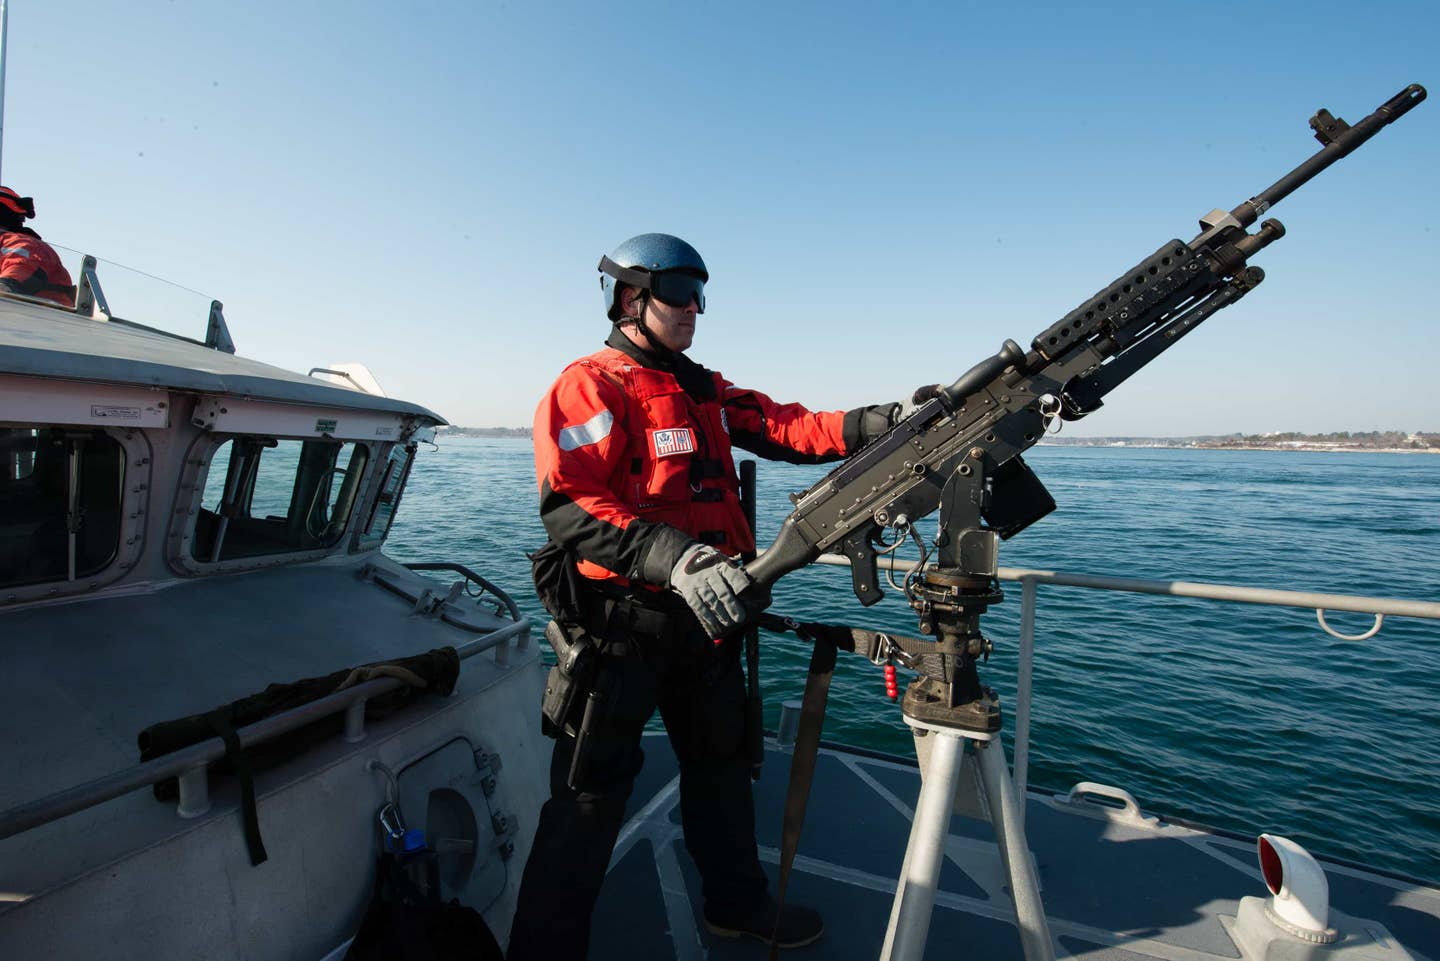 Petty Officer 2nd Class Robert Richey, a crewmember at Coast Guard Station Portsmouth Harbor, mans an M240B machine gun on the bow of a 47-foot Motor Lifeboat during a security escort into Portsmouth Harbor the morning of Thursday, Feb. 23, 2017. (U.S. Coast Guard photo by Petty Officer 3rd Class Andrew Barresi)